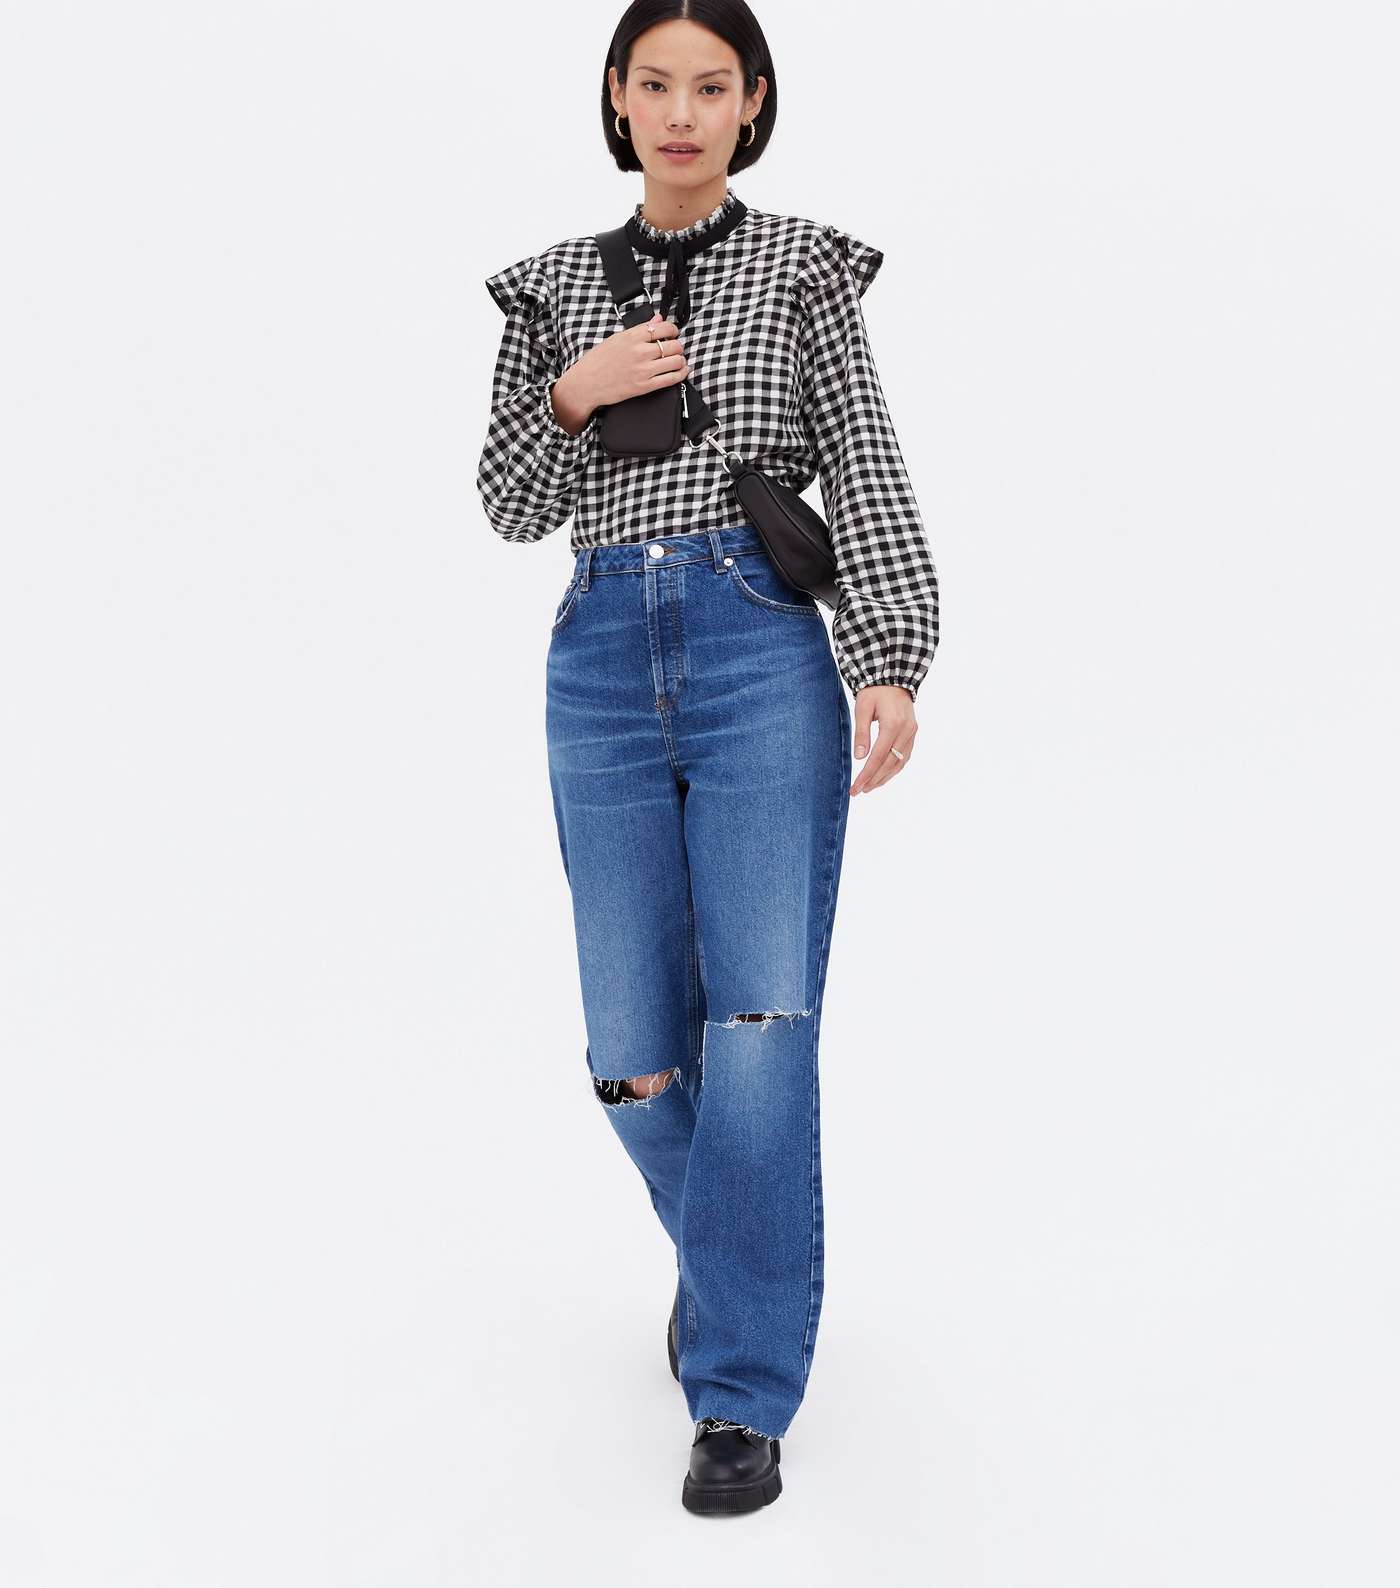 Black Check Tie High Neck Frill Blouse Image 2